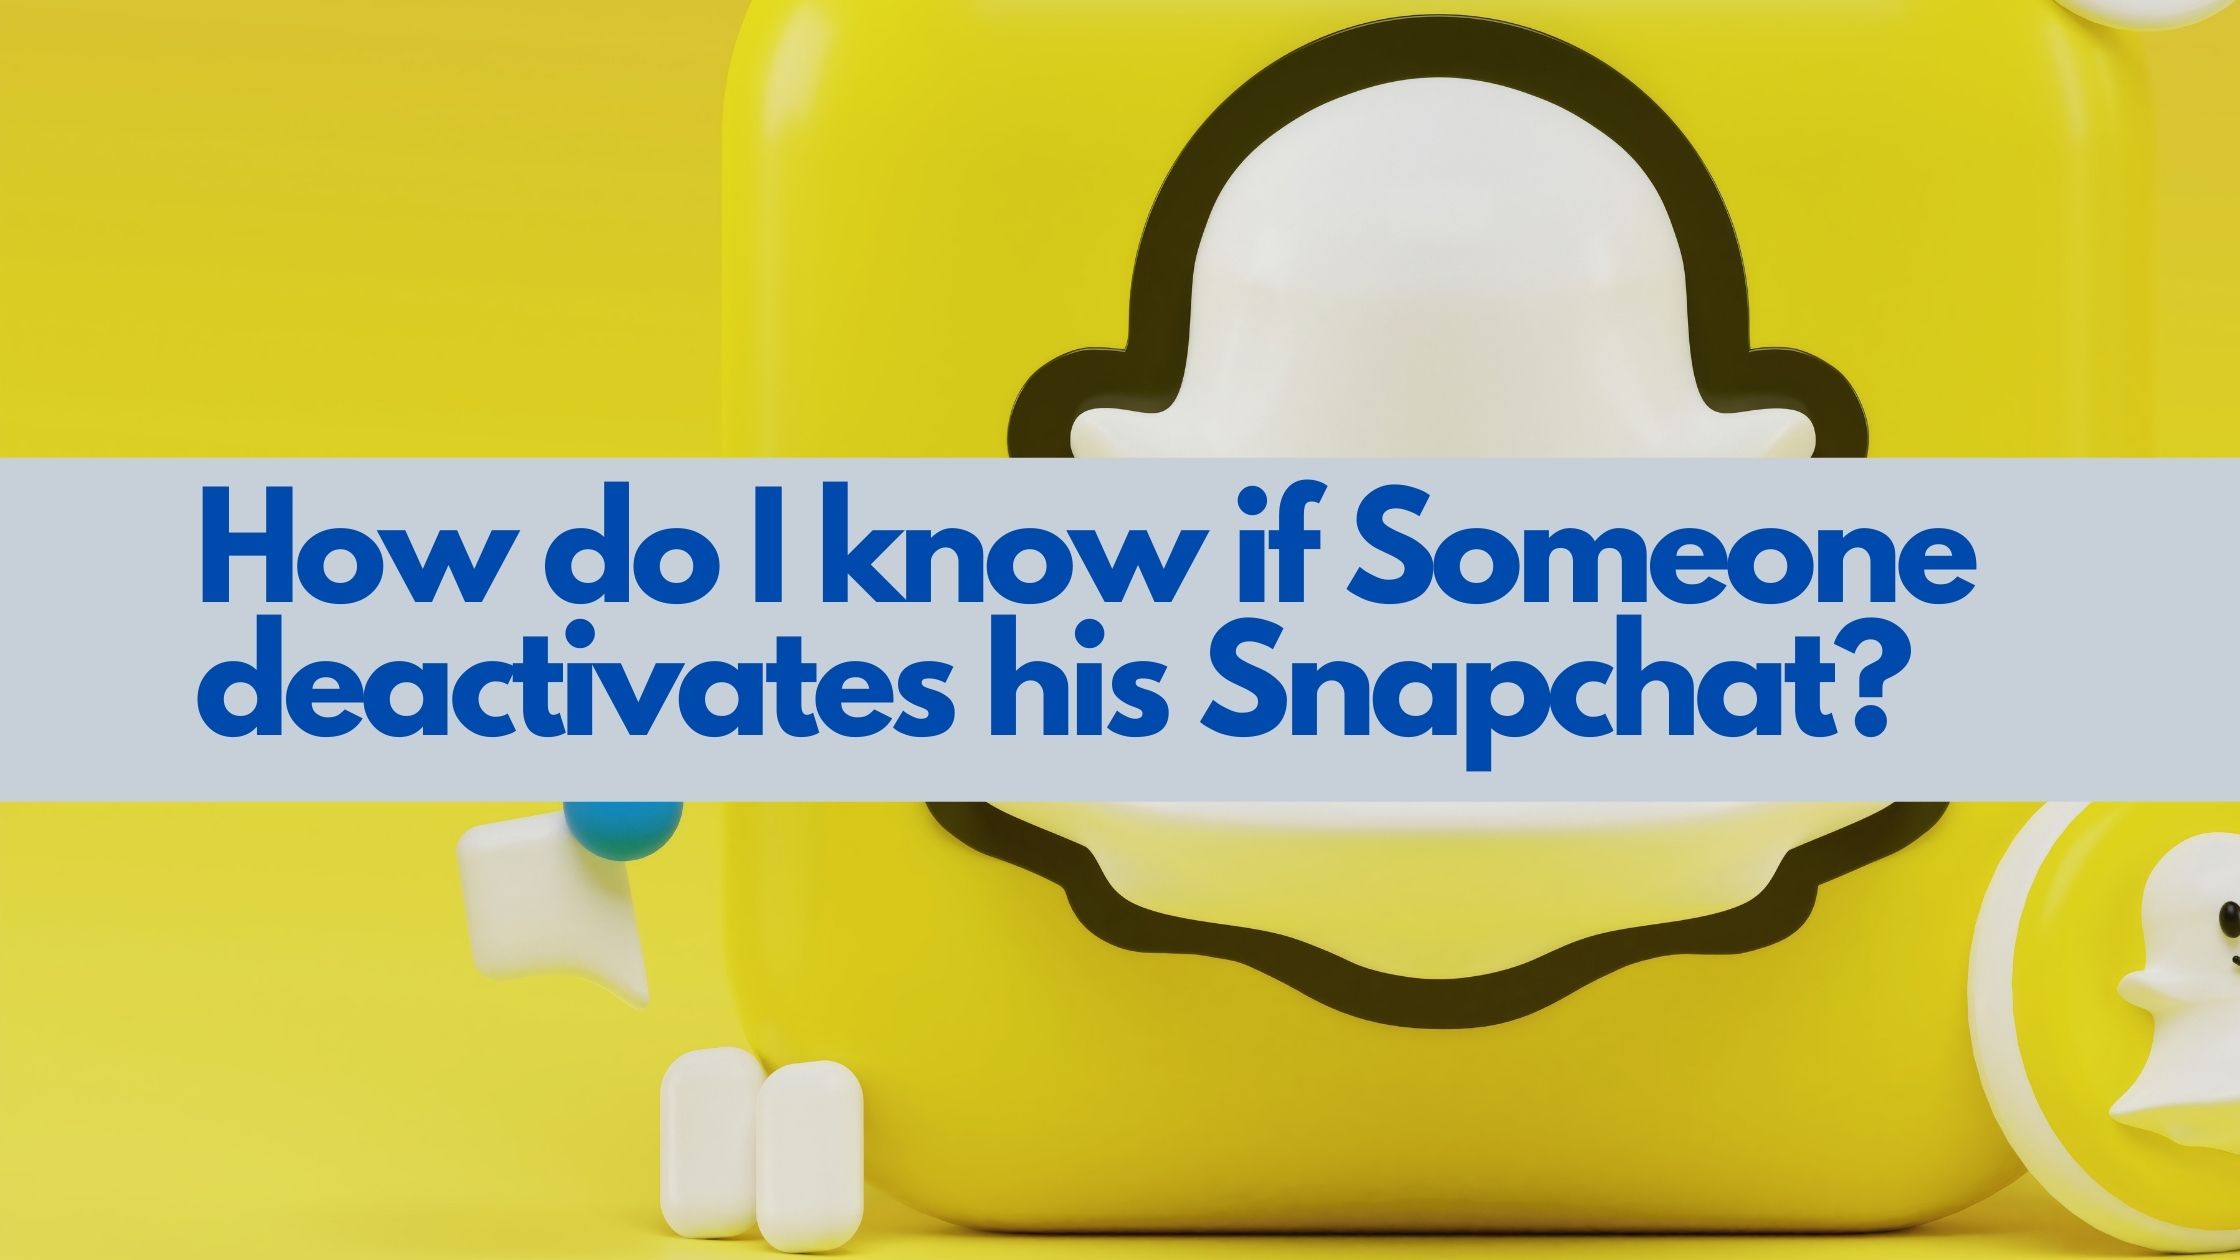 How do I know if Someone deactivates his Snapchat?